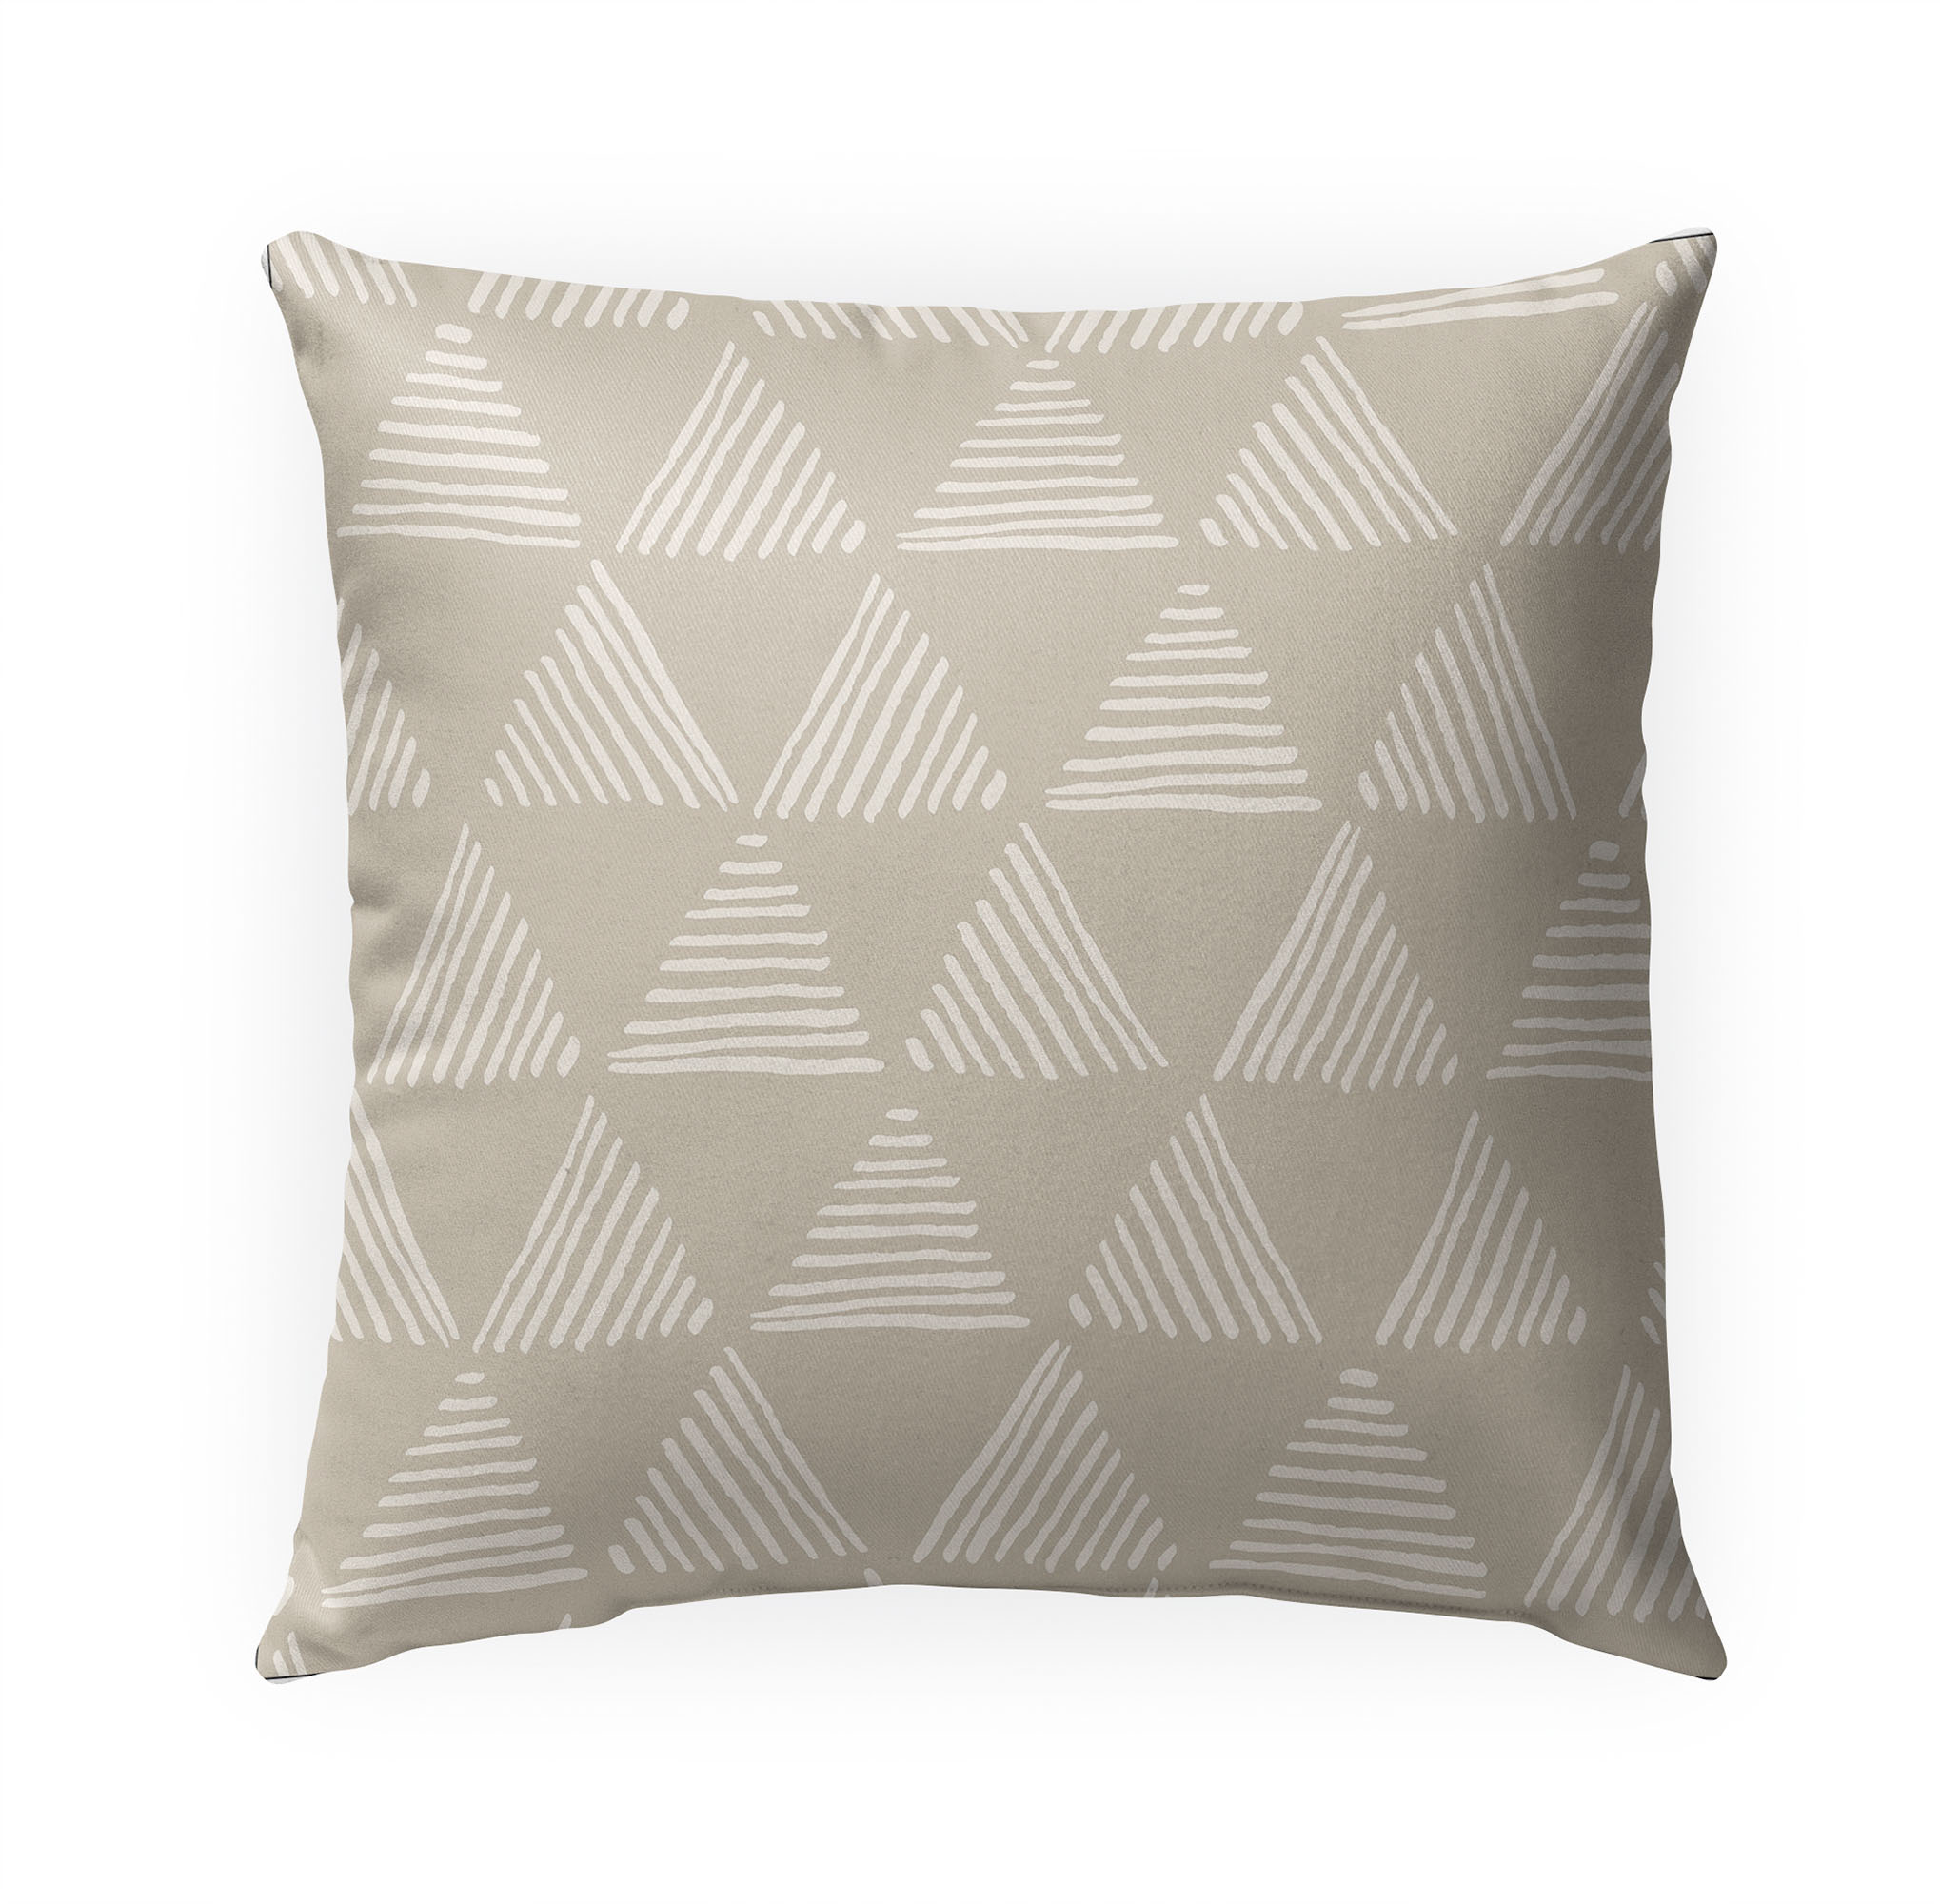 Triangular Prism Beige Outdoor Pillow by Kavka Designs - image 1 of 5